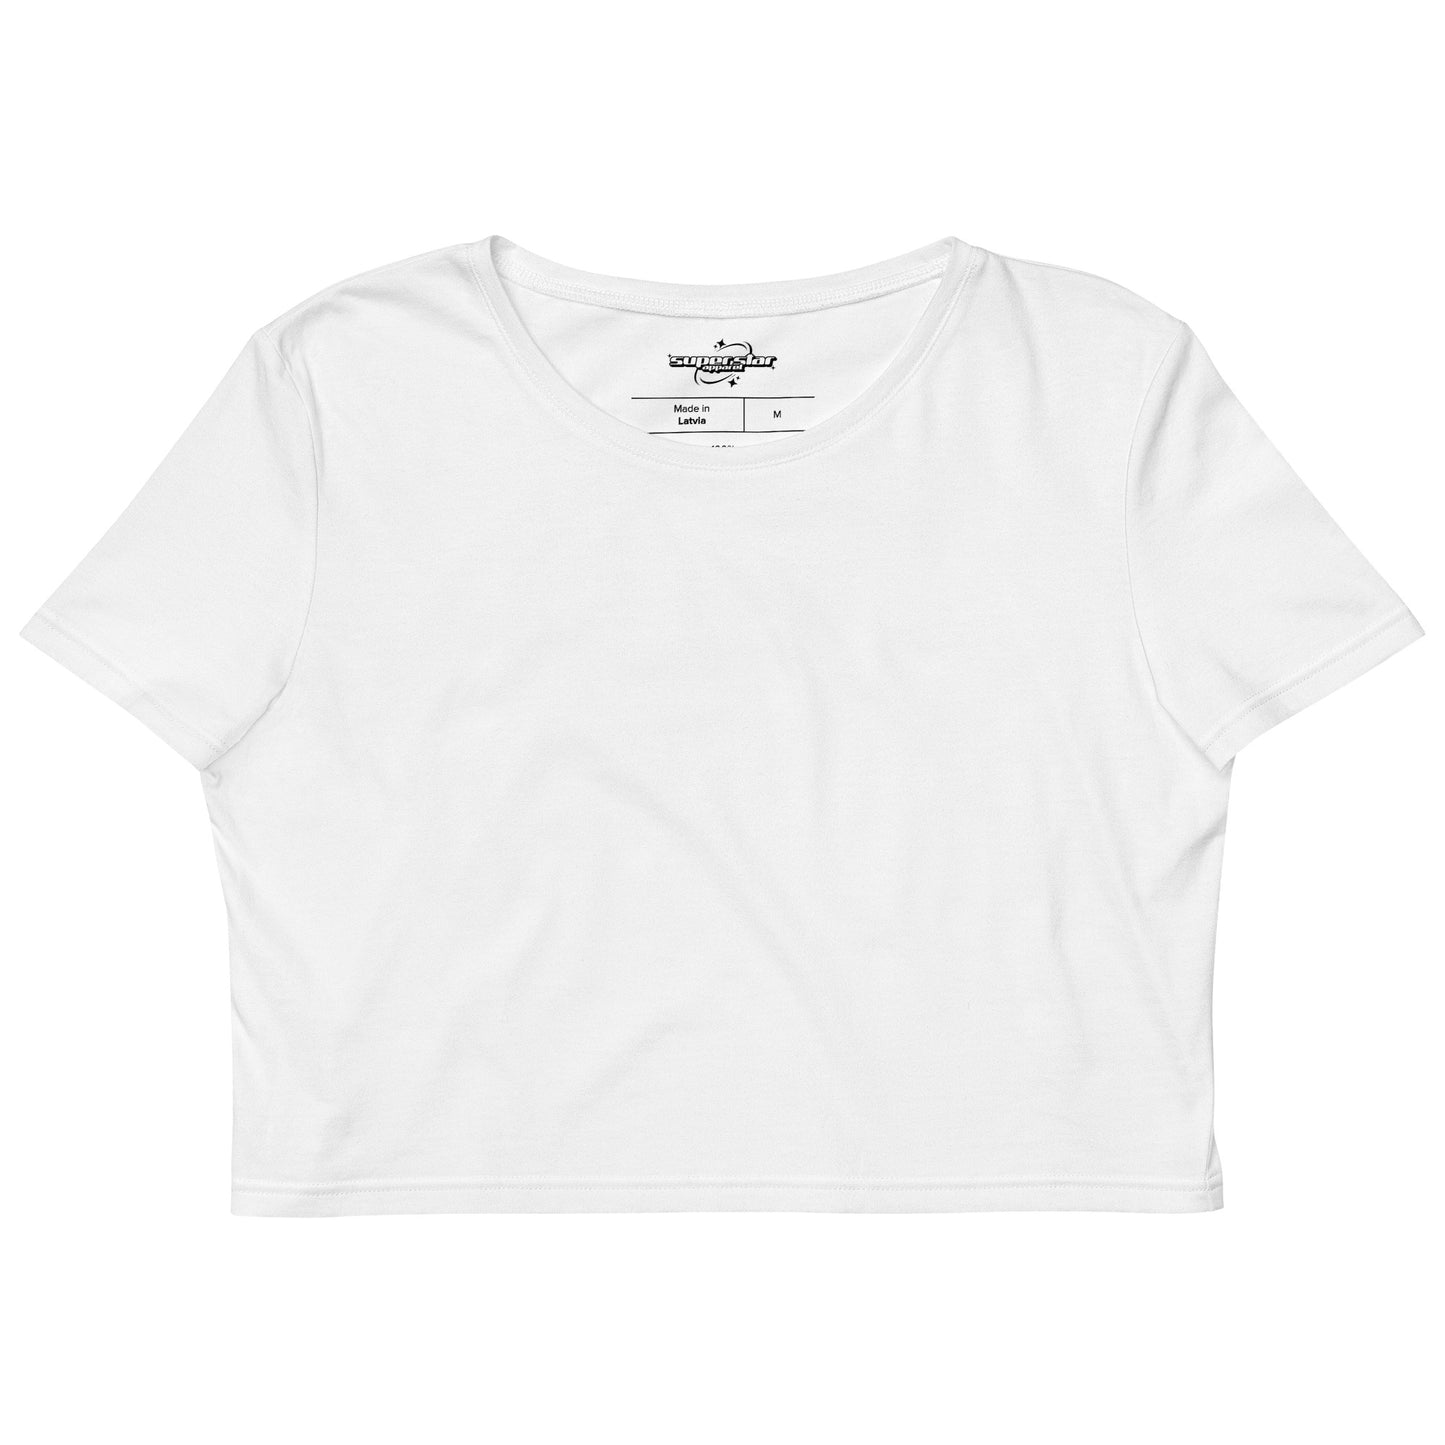 SSDNYP Embroidered Crop Top